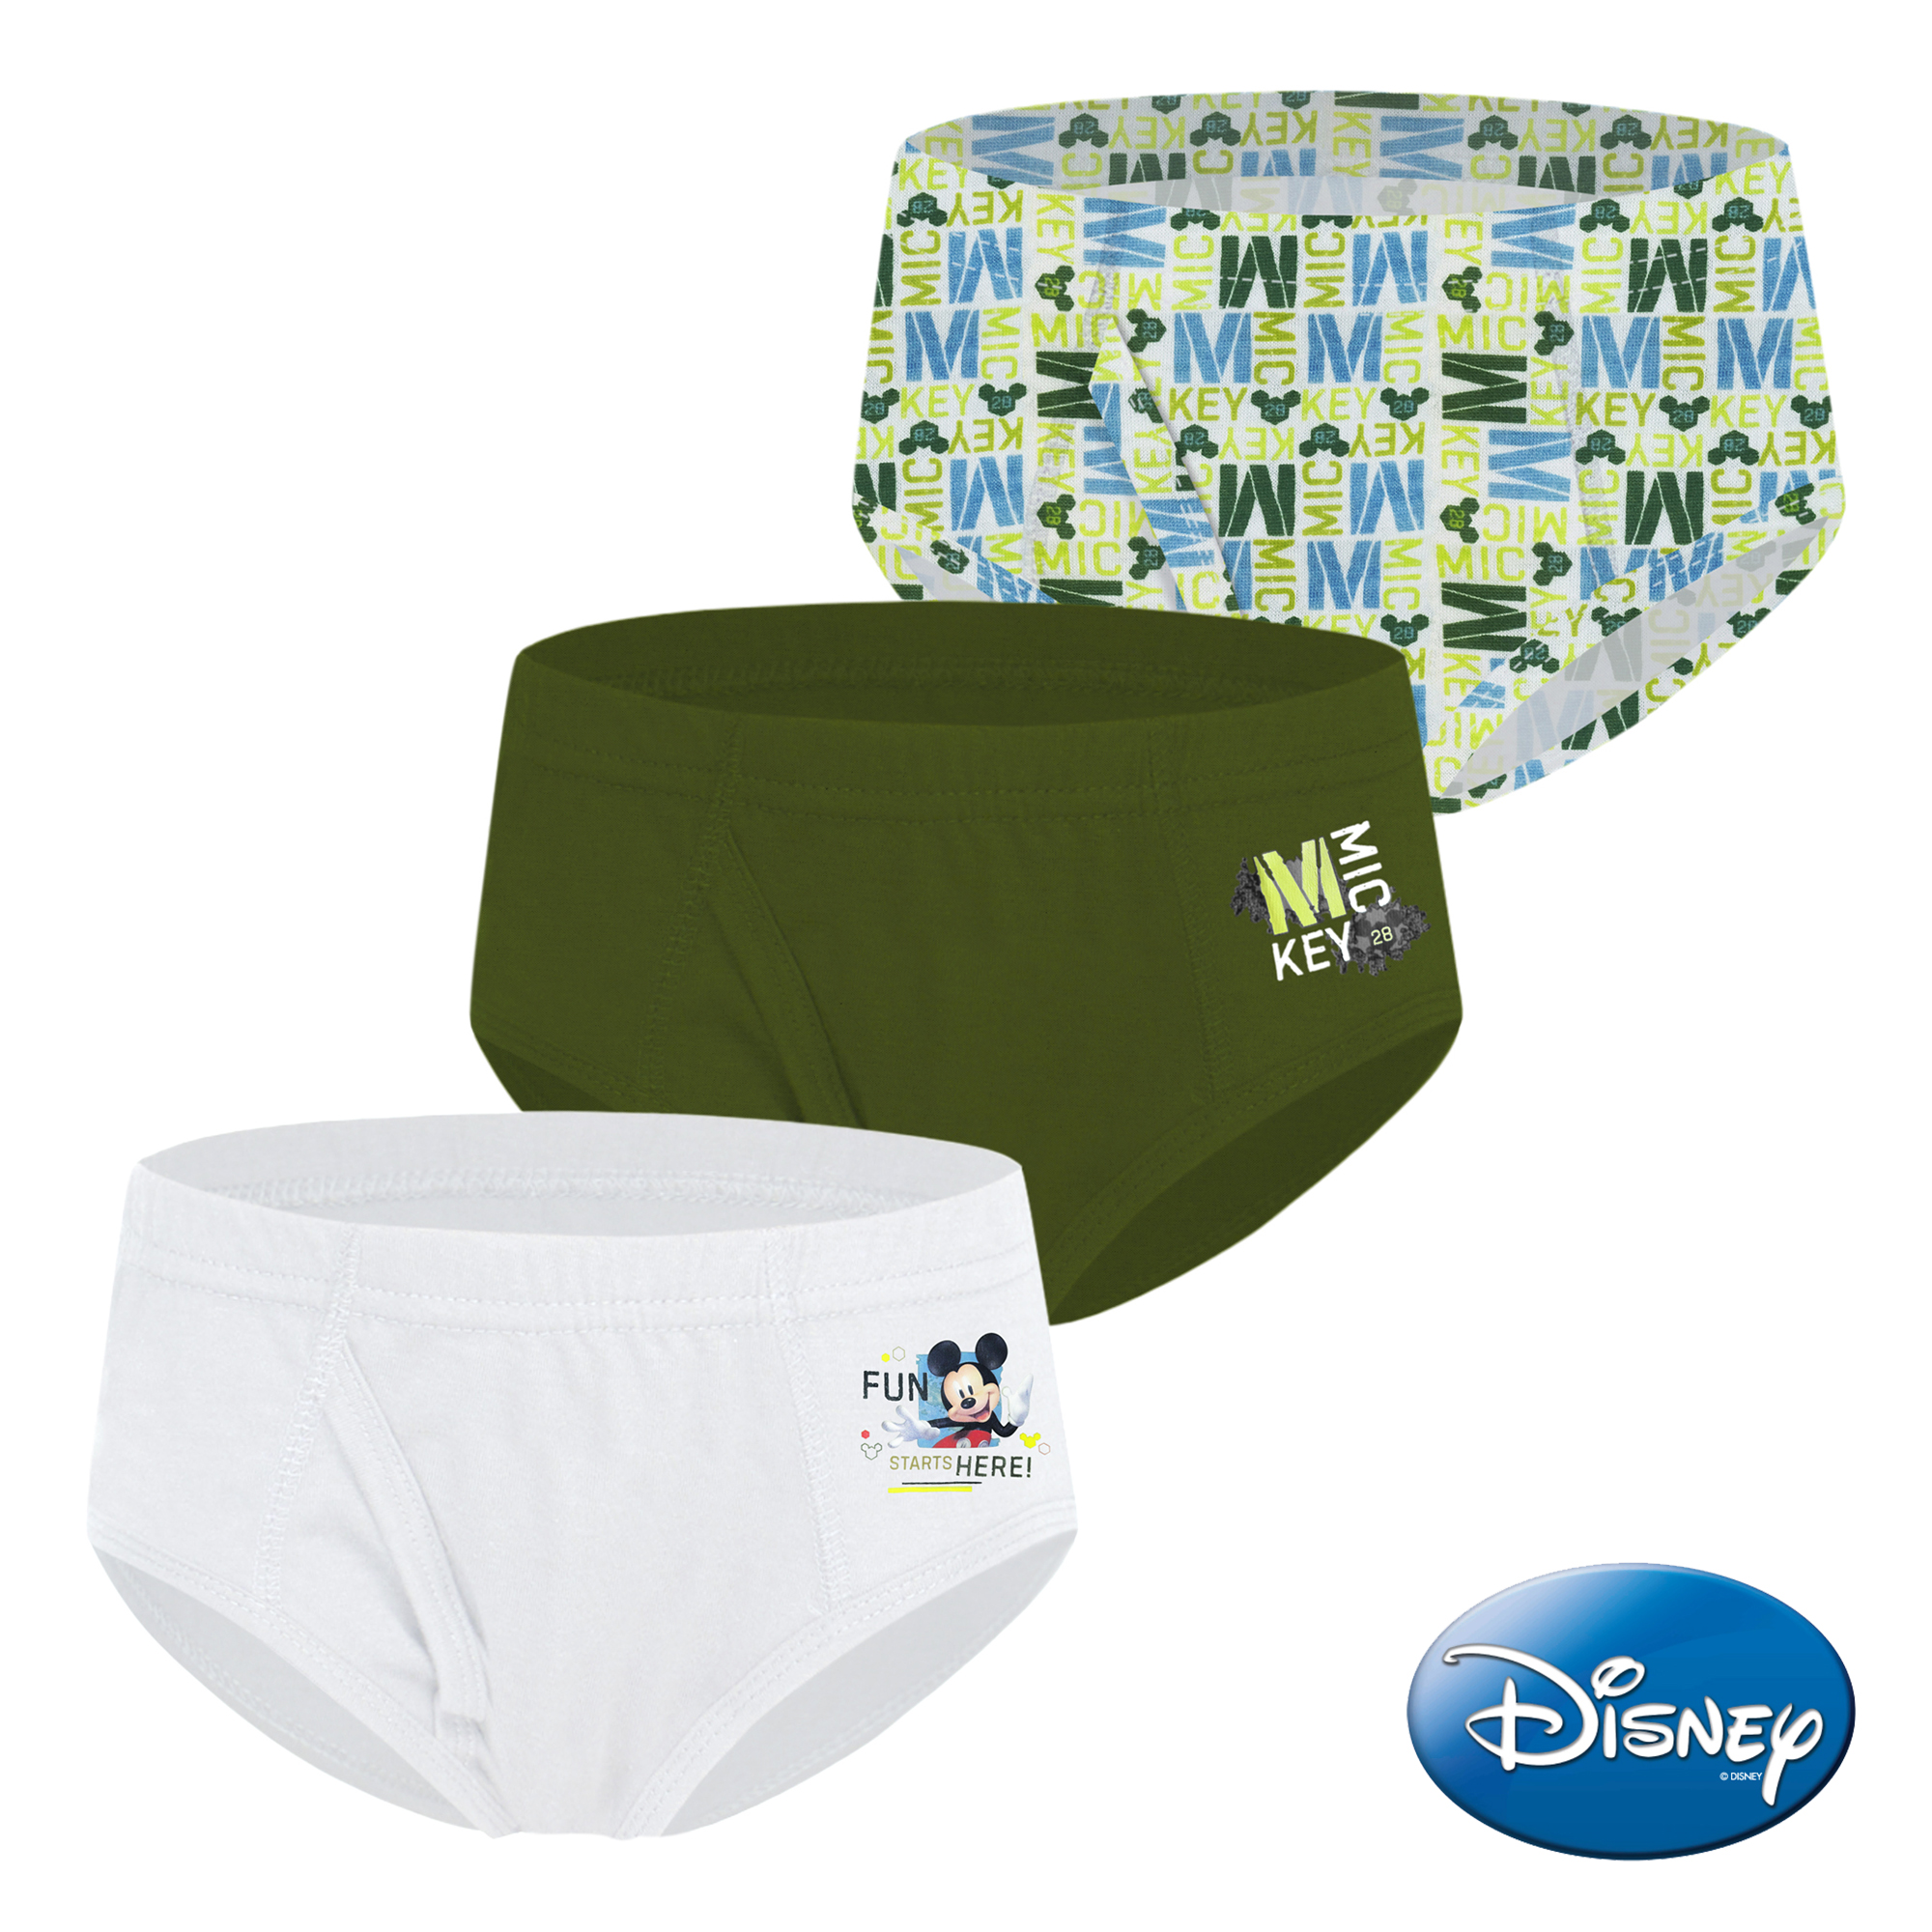 Mickey Mouse Toddler Boys' Brief Underwear, 3 Pack 